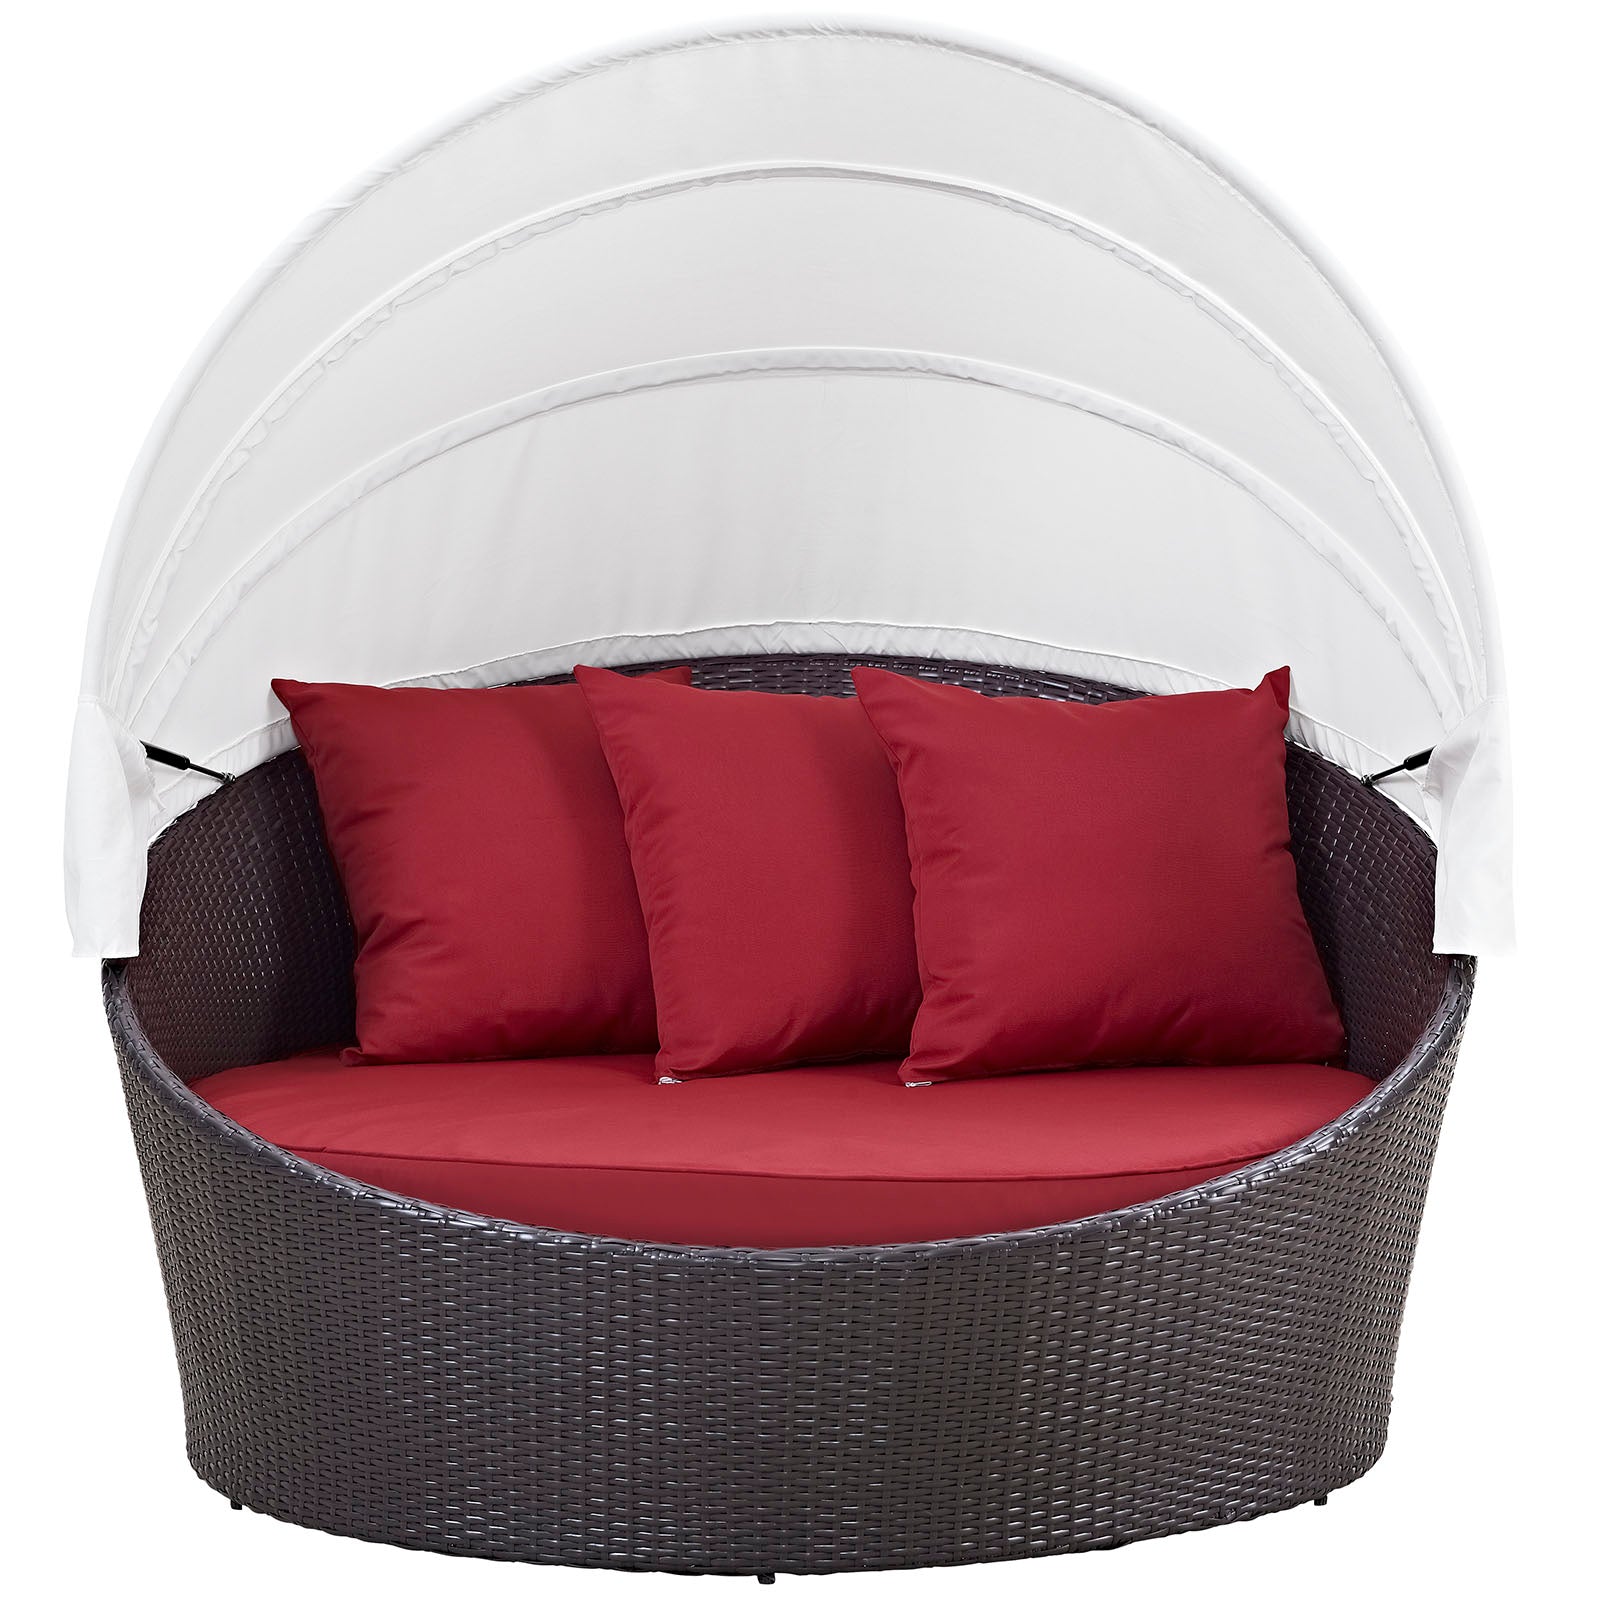 Modway Patio Daybeds - Convene Canopy Outdoor Patio 63"W Daybed Espresso Red